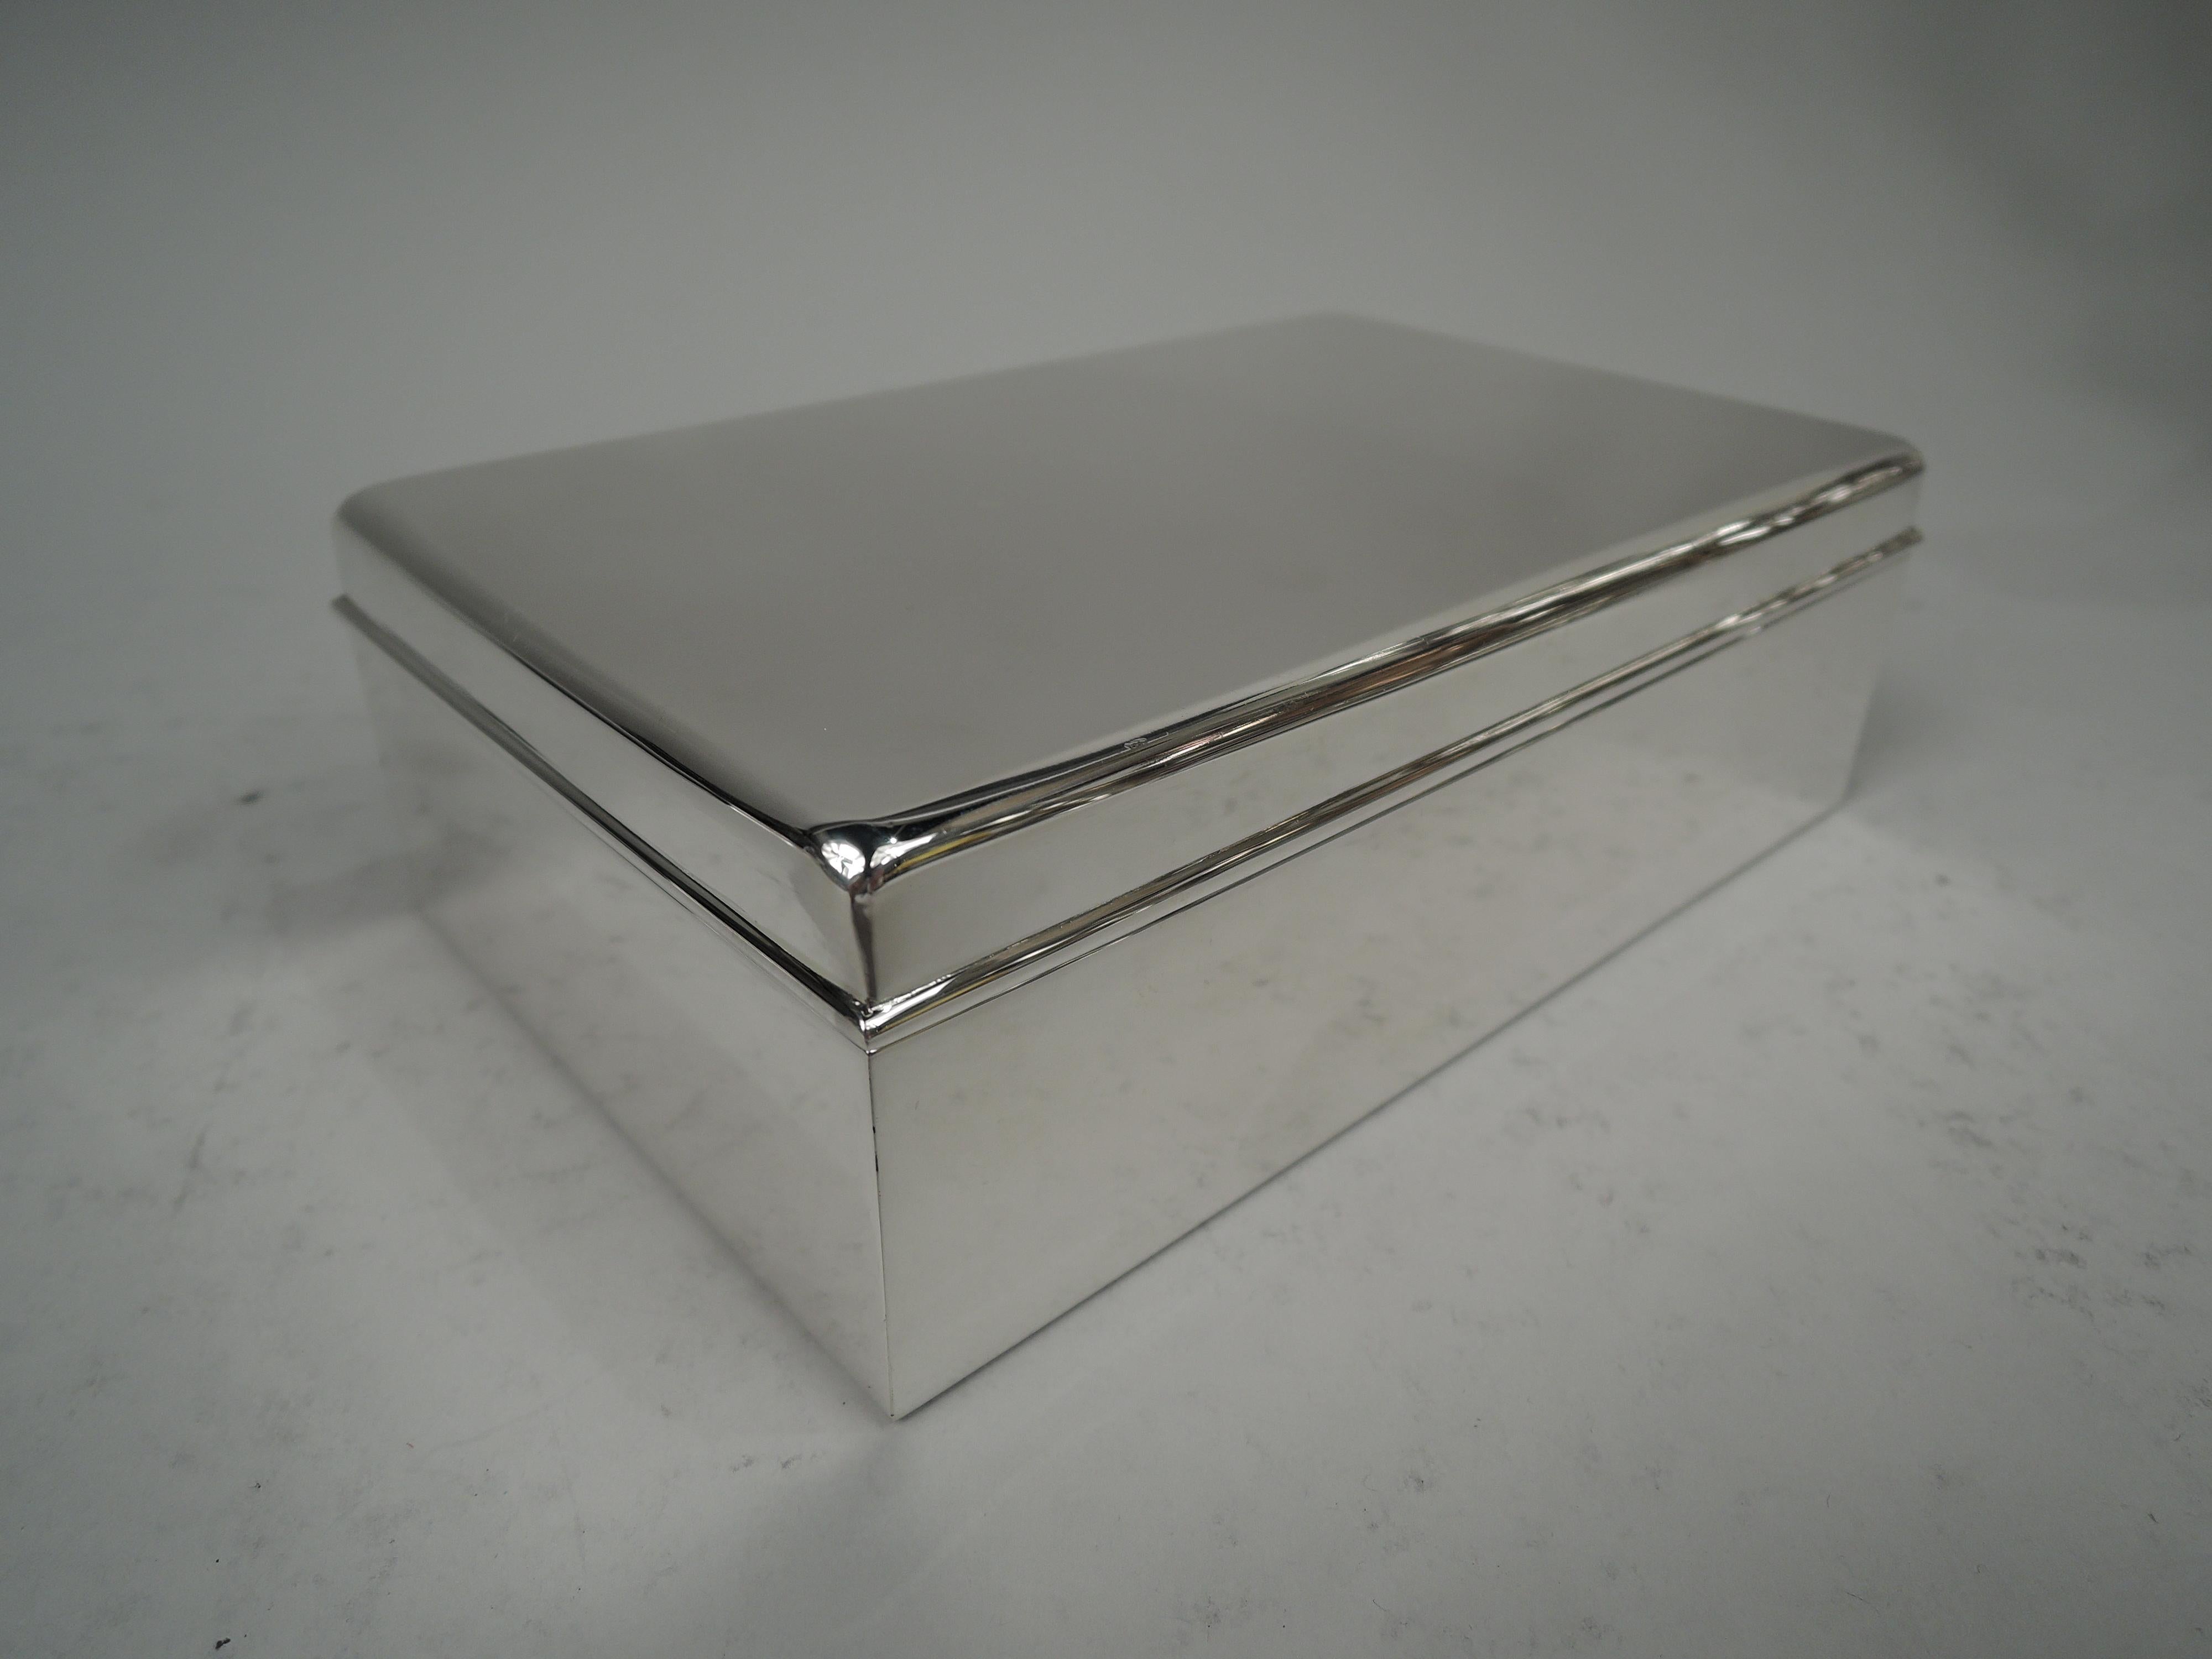 Midcentury Modern sterling silver box. Made by Tiffany & Co. in New York. Rectangular with straight sides. Cover has flat top and molded rim. Box interior cedar-lined and partitioned. Cover interior gilt washed. Fully marked including maker’s stamp